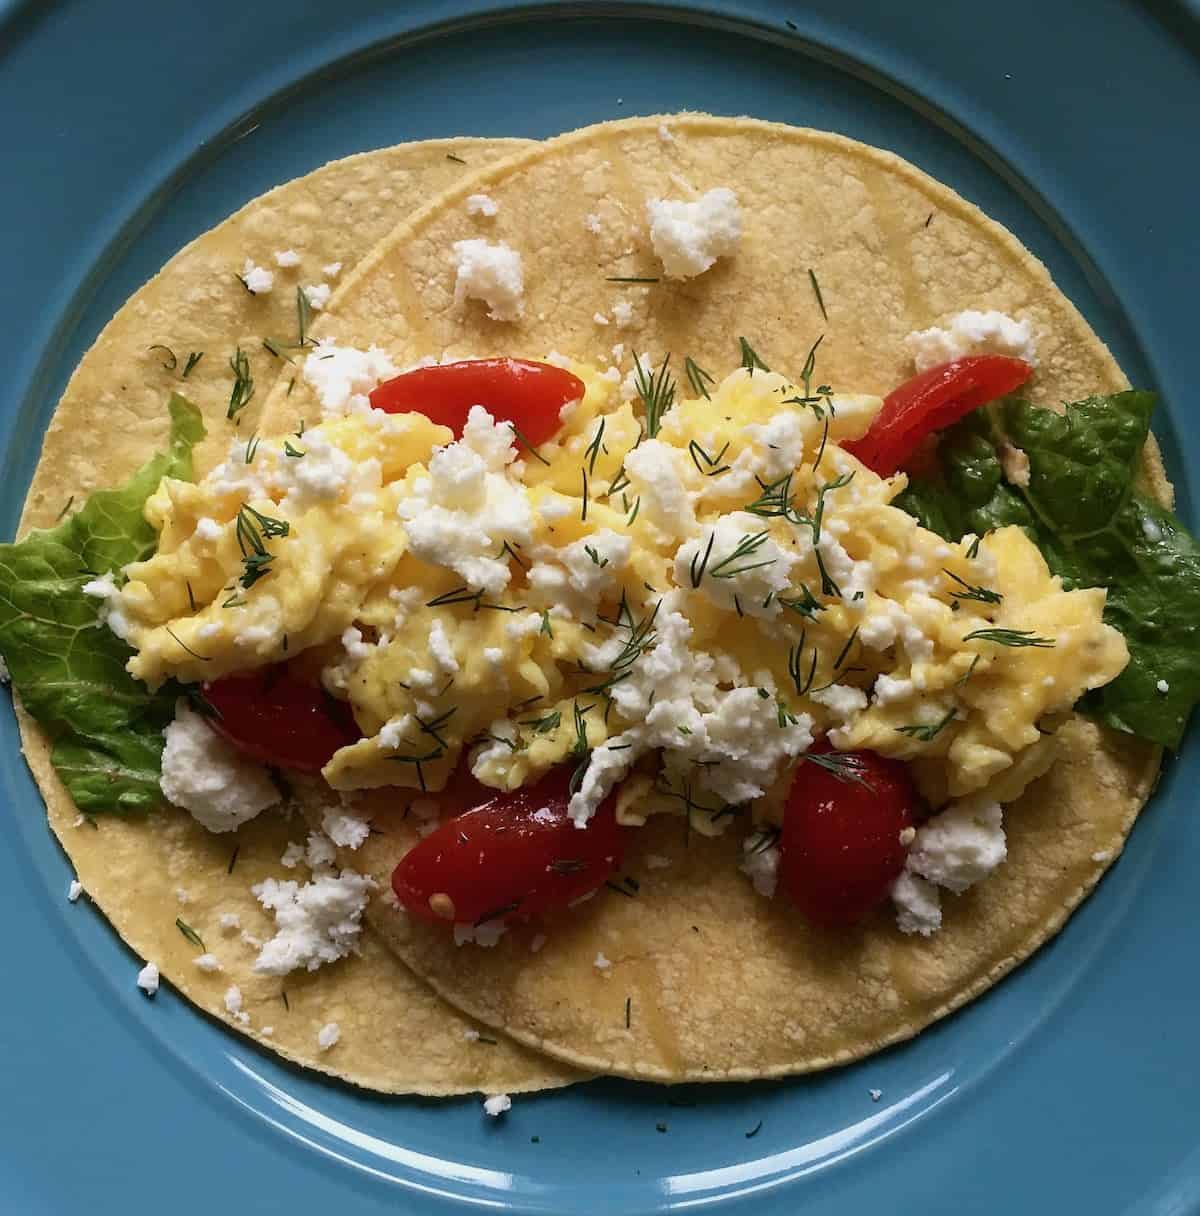 Tortillas topped with eggs, cheese and tomatoes are perfect pairings.